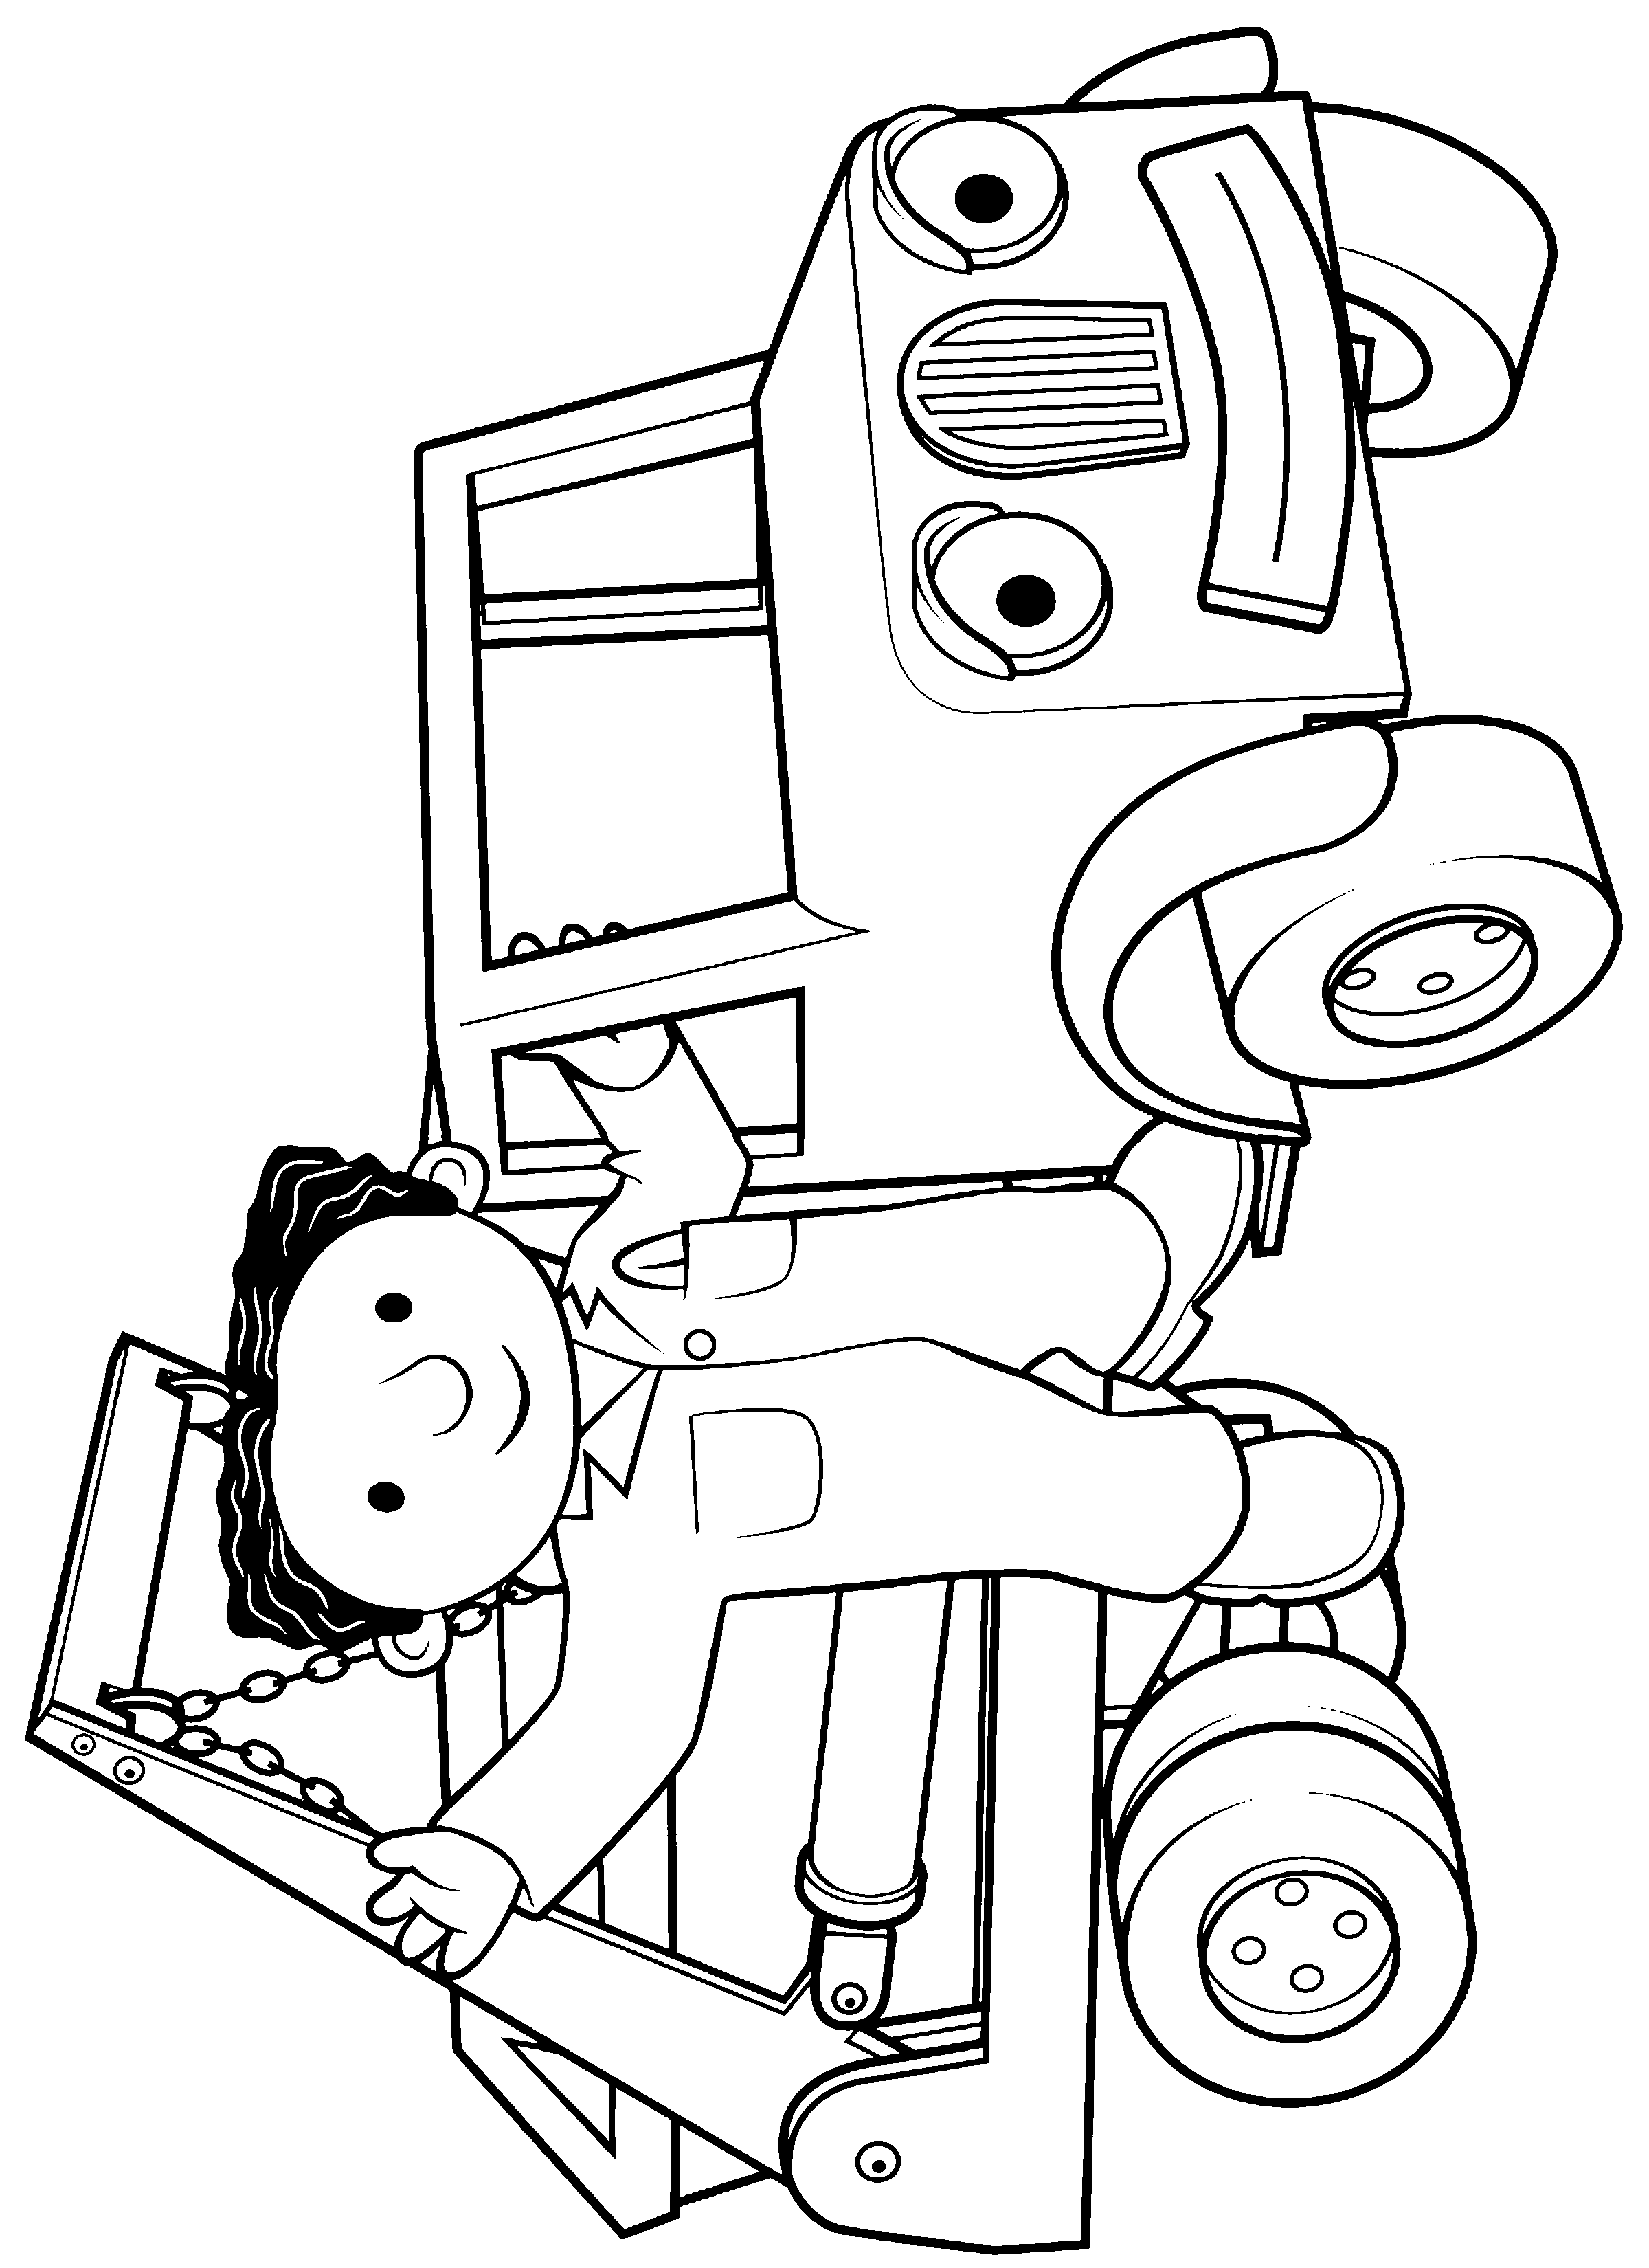 animated-coloring-pages-bob-the-builder-image-0110